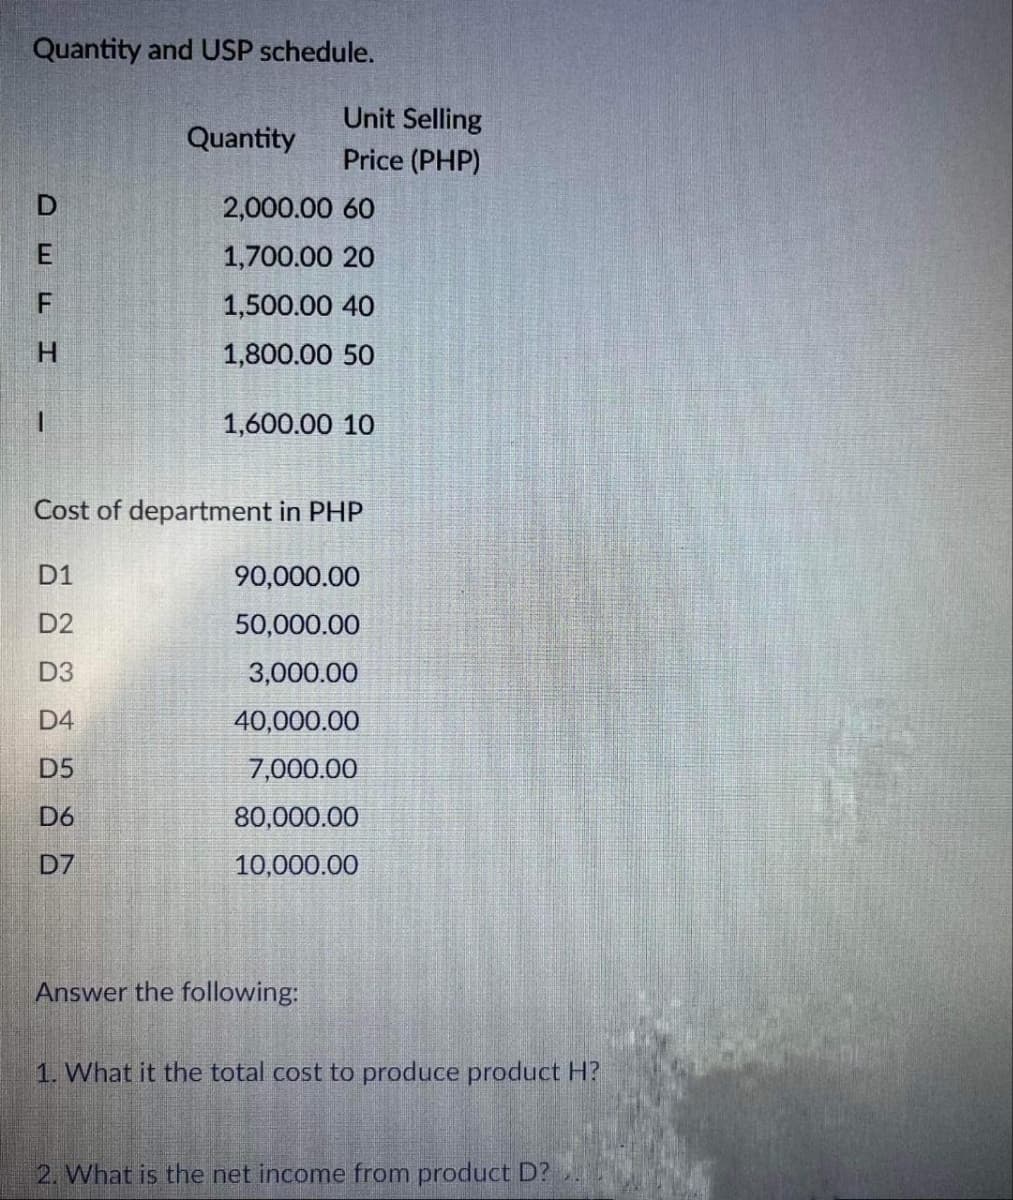 Quantity and USP schedule.
DEFI
H
1
Quantity
D1
D2
D3
D4
D5
D6
D7
Unit Selling
Price (PHP)
2,000.00 60
1,700.00 20
1,500.00 40
1,800.00 50
1,600.00 10
Cost of department in PHP
90,000.00
50,000.00
3,000.00
40,000.00
7,000.00
80,000.00
10,000.00
Answer the following:
1. What it the total cost to produce product H?
2. What is the net income from product D?